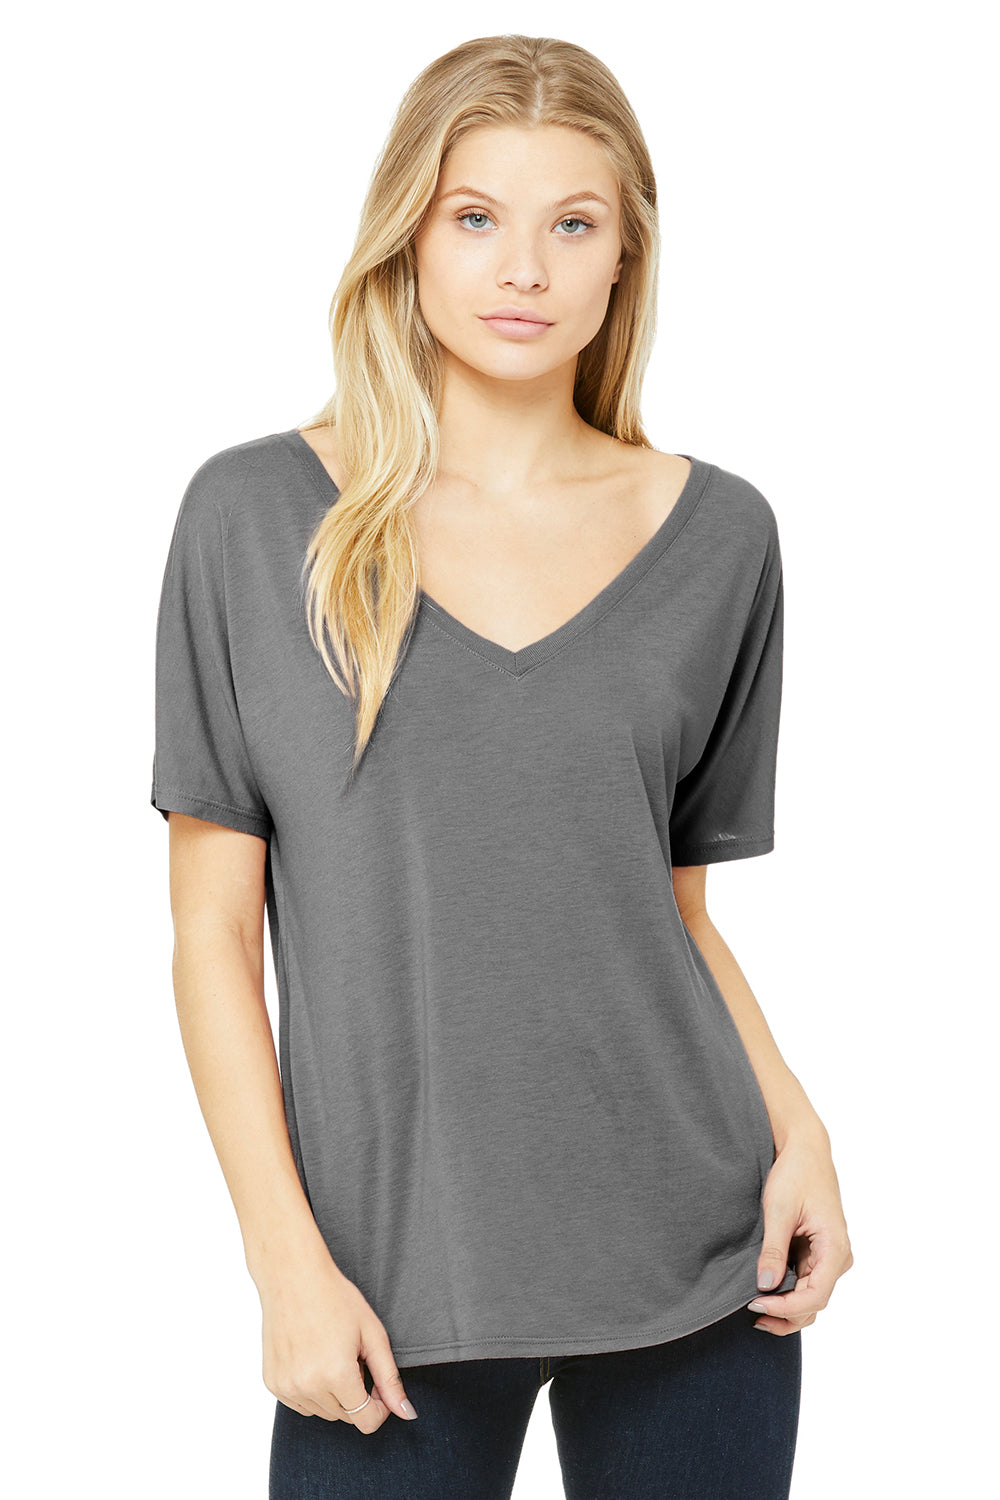 Bella + Canvas 8815 Womens Slouchy Short Sleeve V-Neck T-Shirt Grey Triblend Front